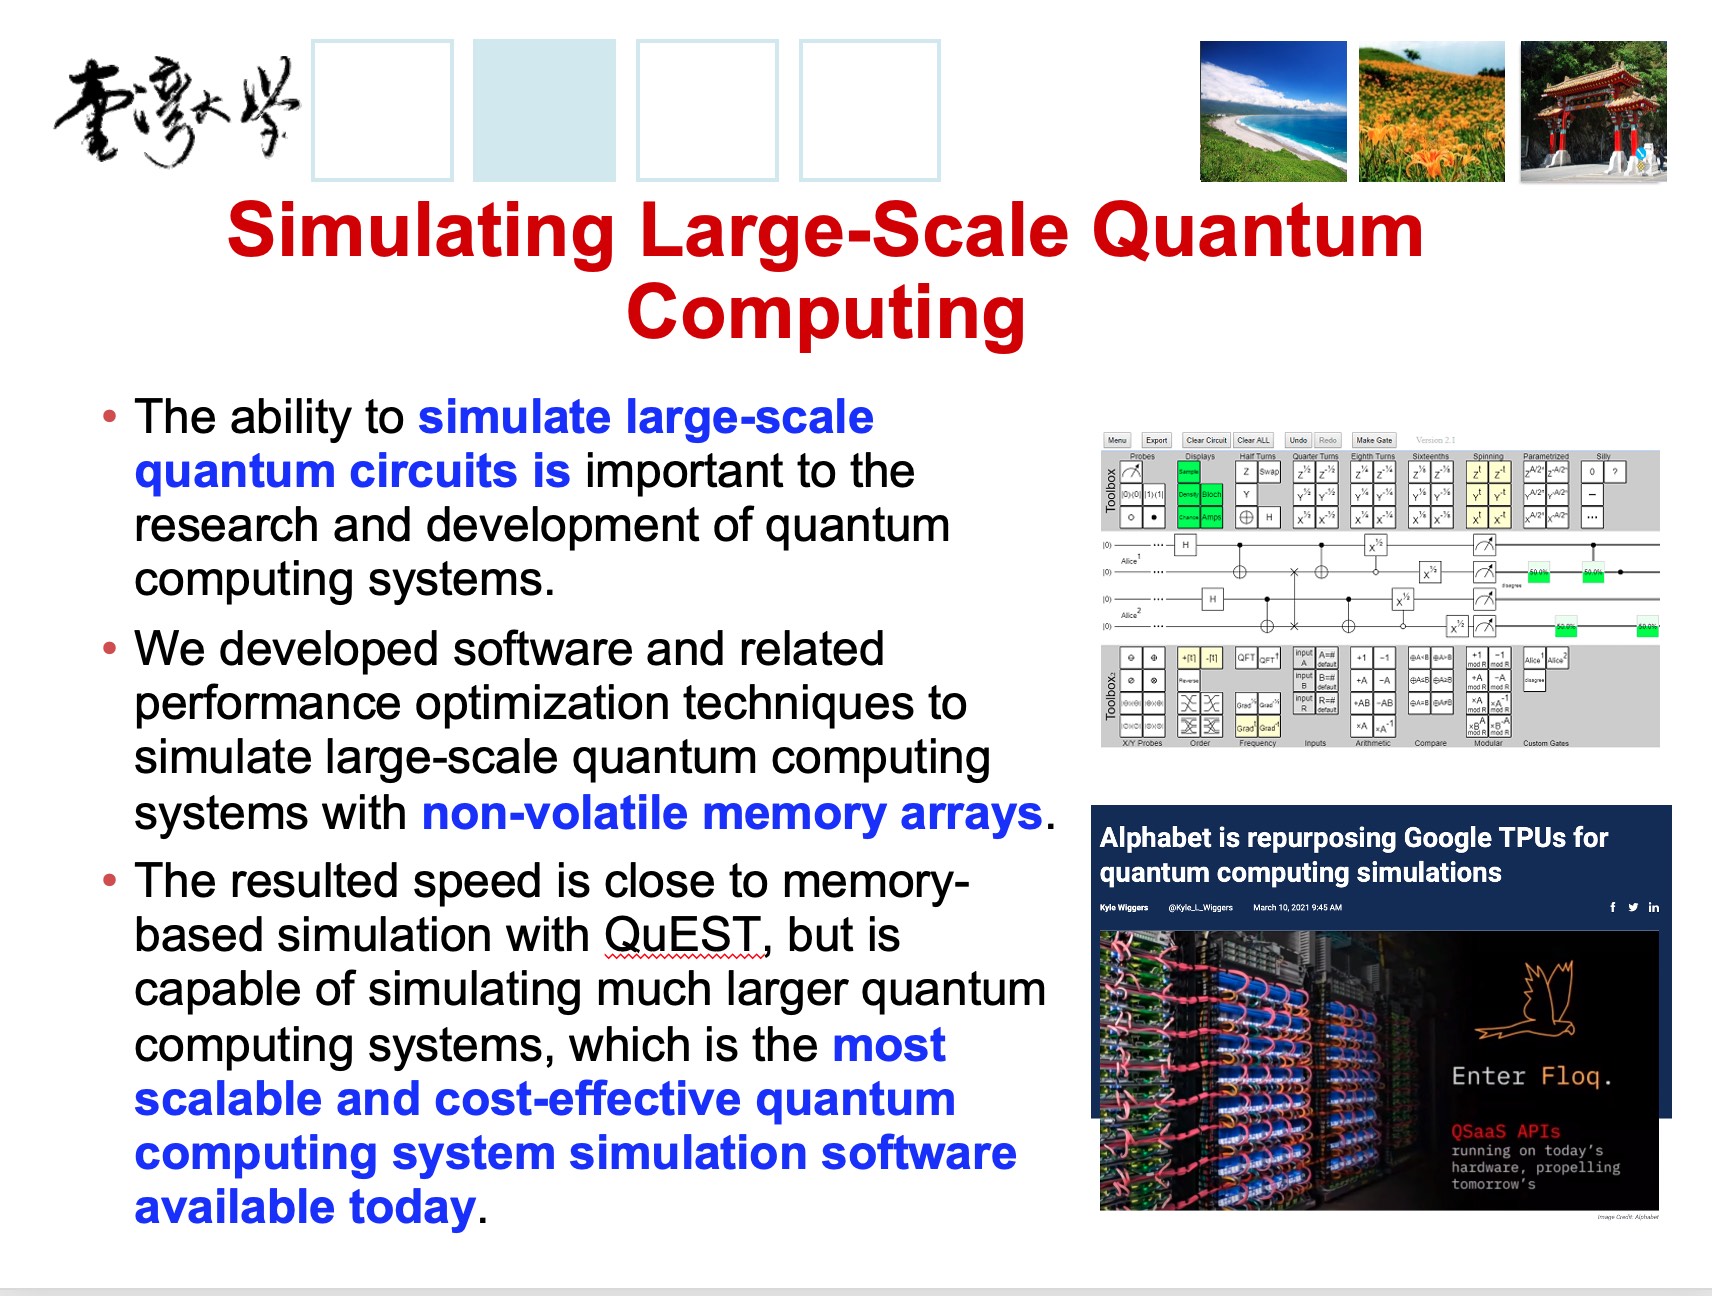 Simulating Large-Scale Quantum Computing Systems with High-Speed Non-Volatile Memory Arrays